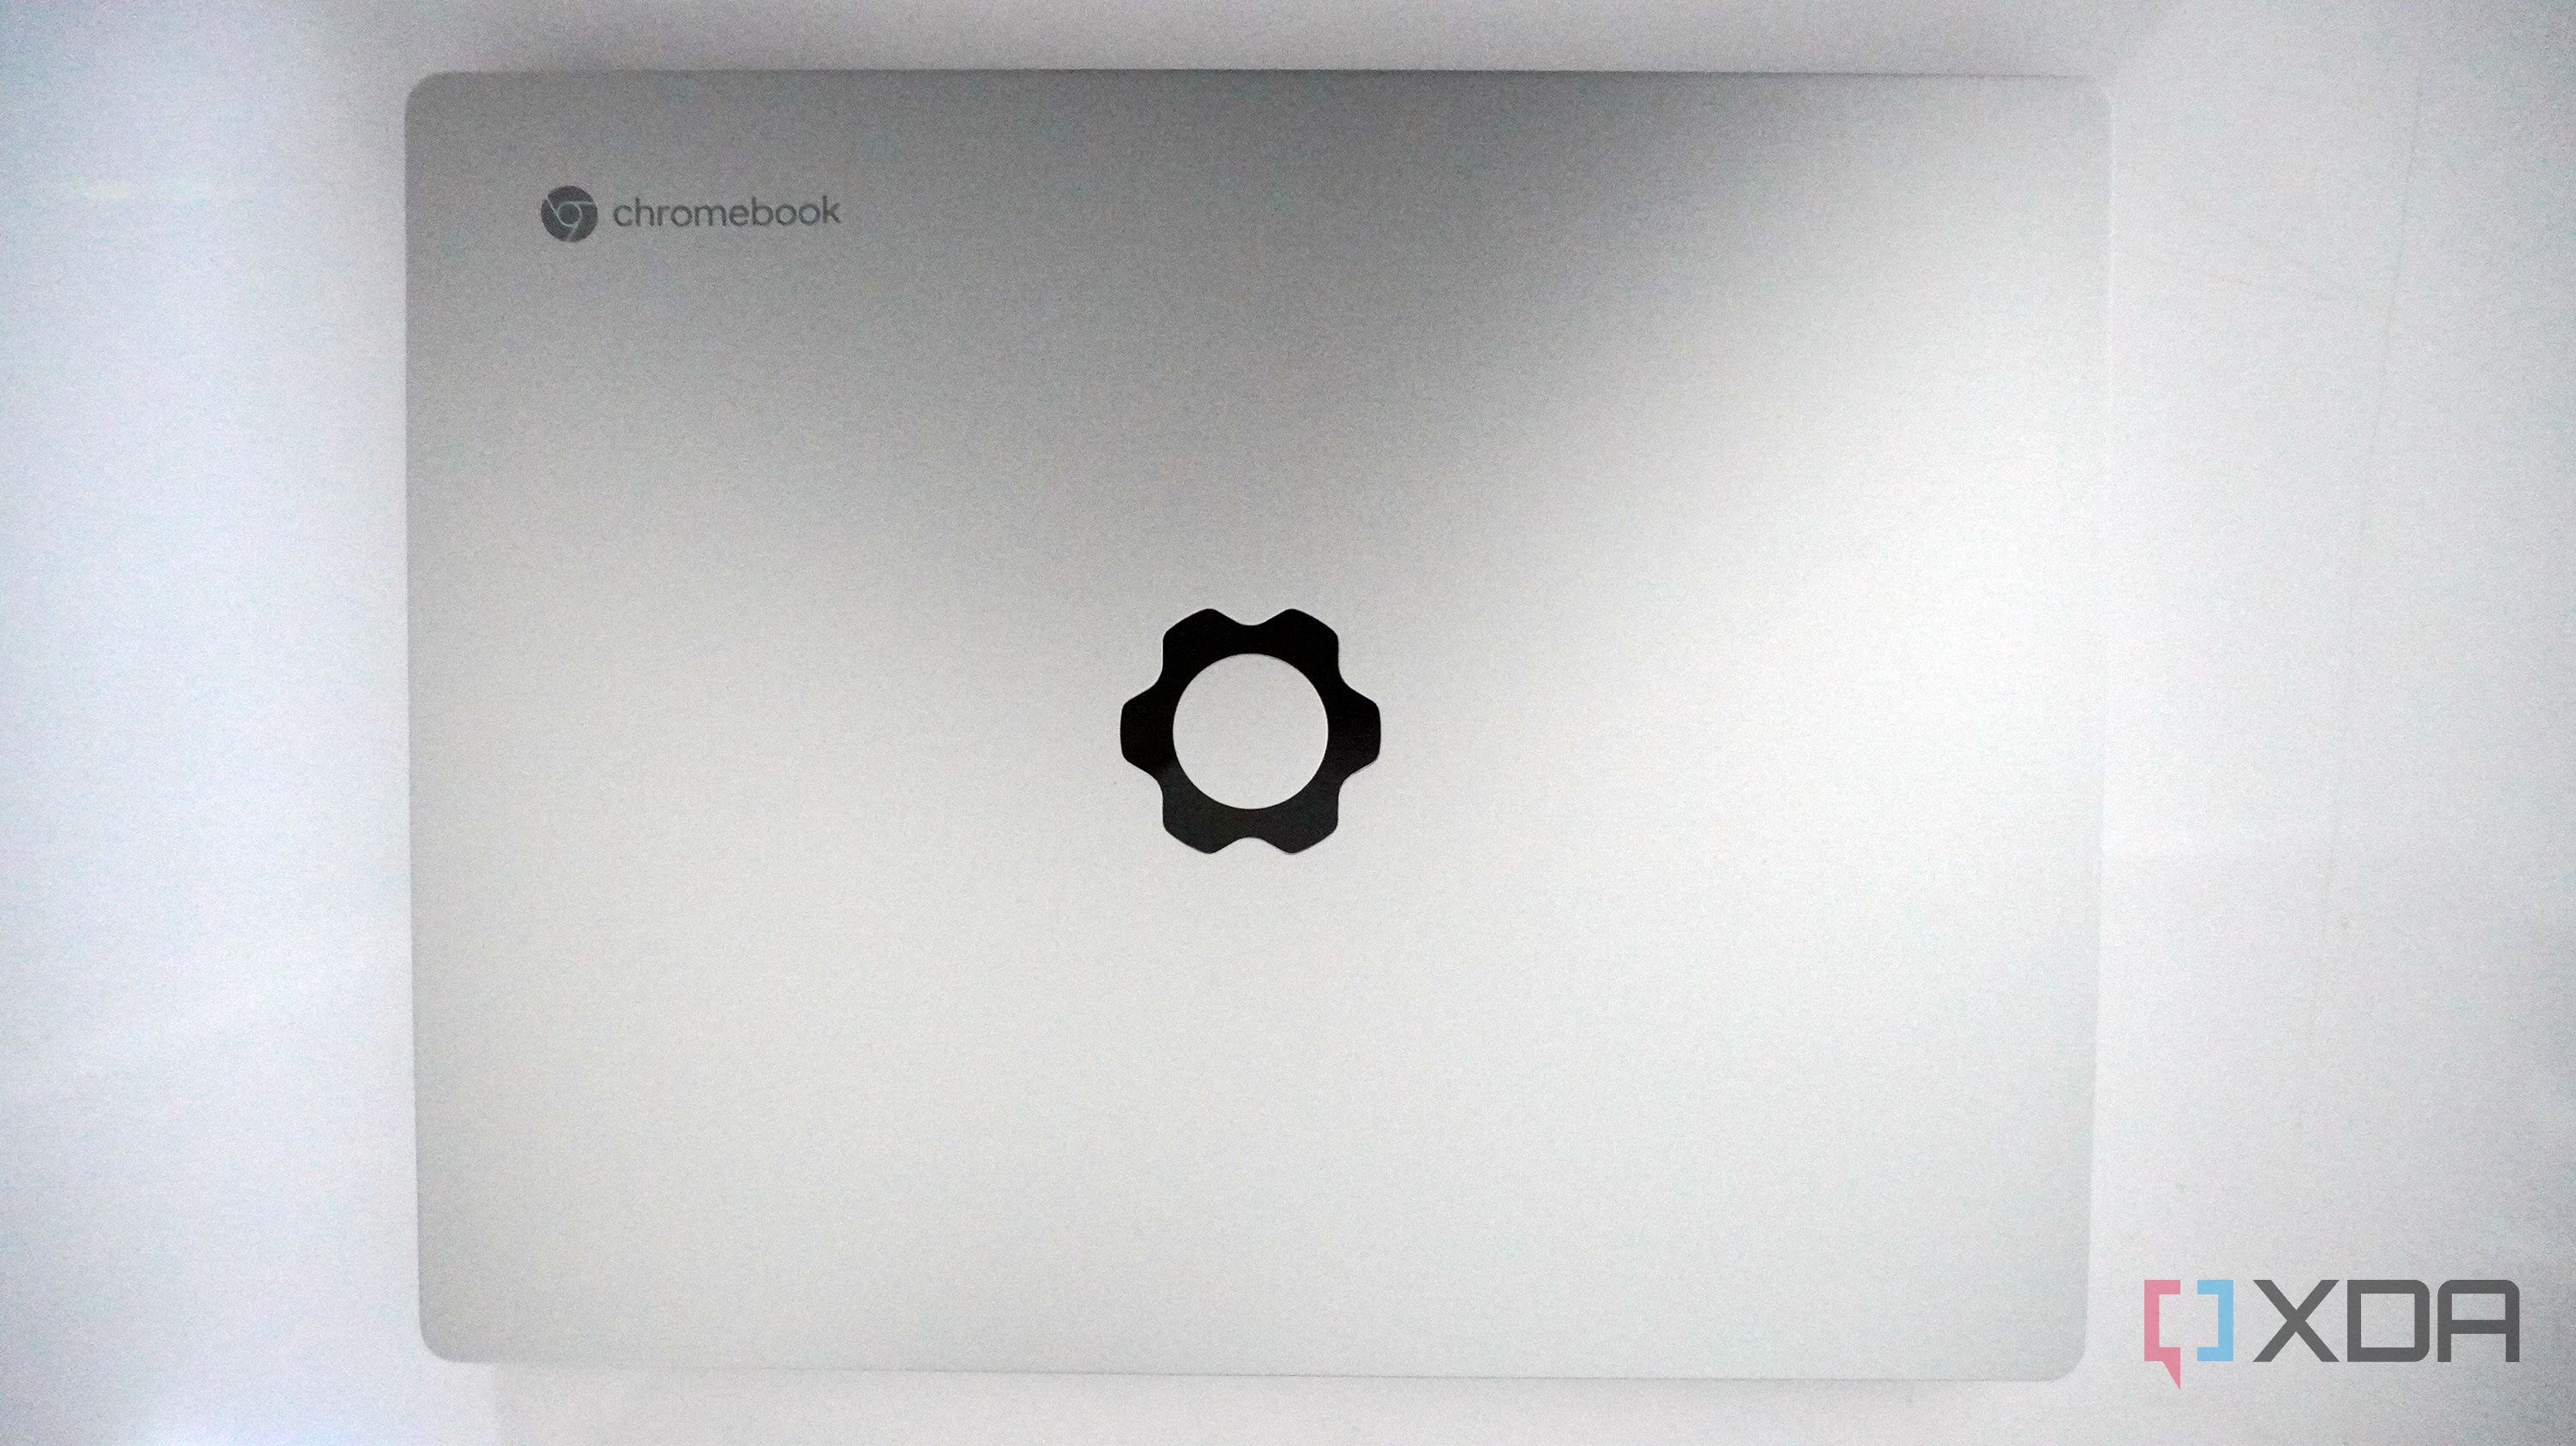 The top lid of the Framework Chromebook.